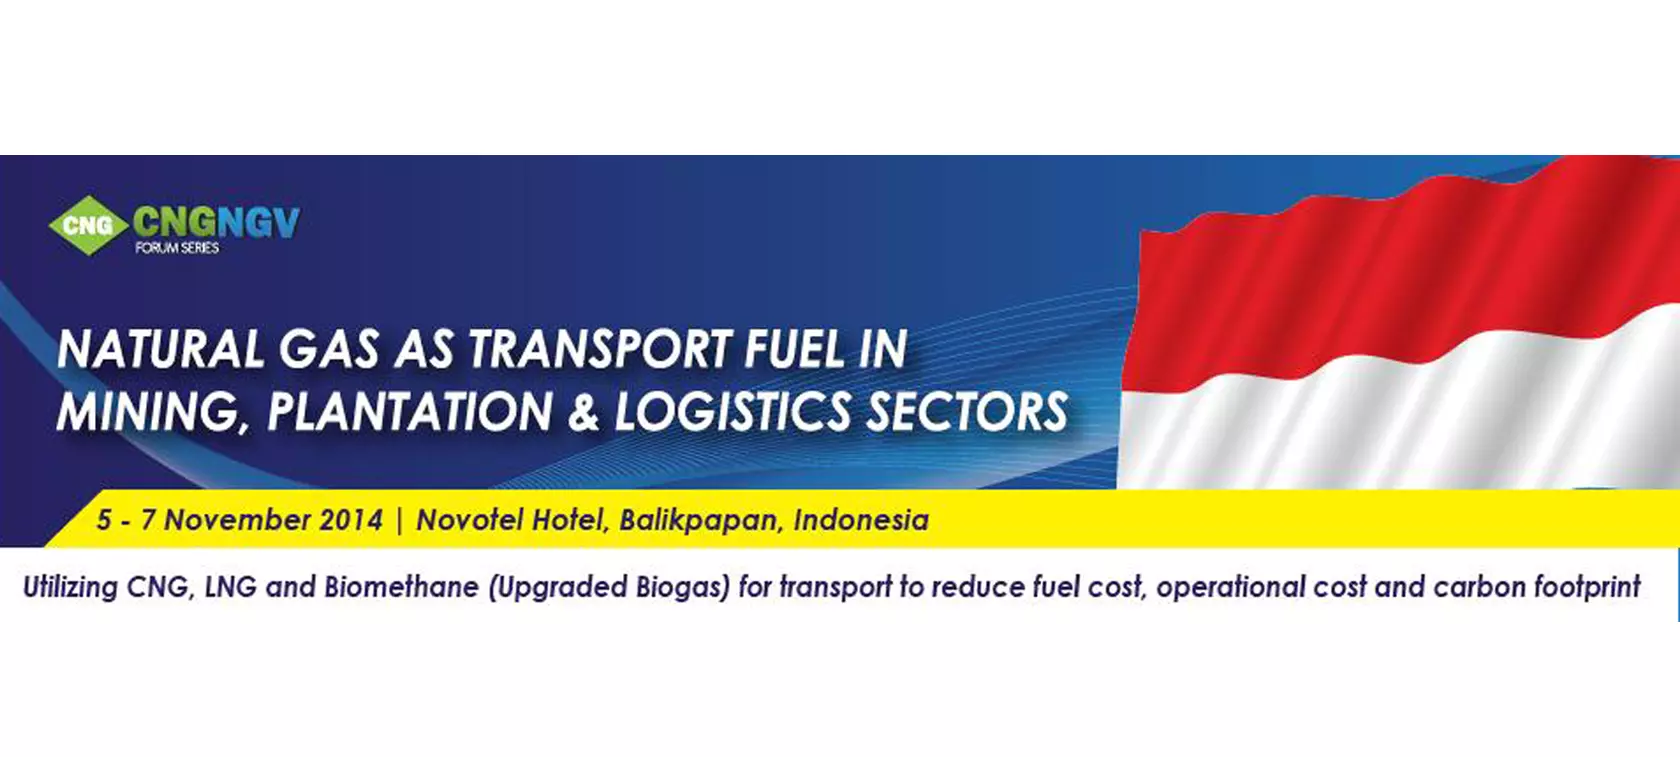 About NGVs in Indonesia